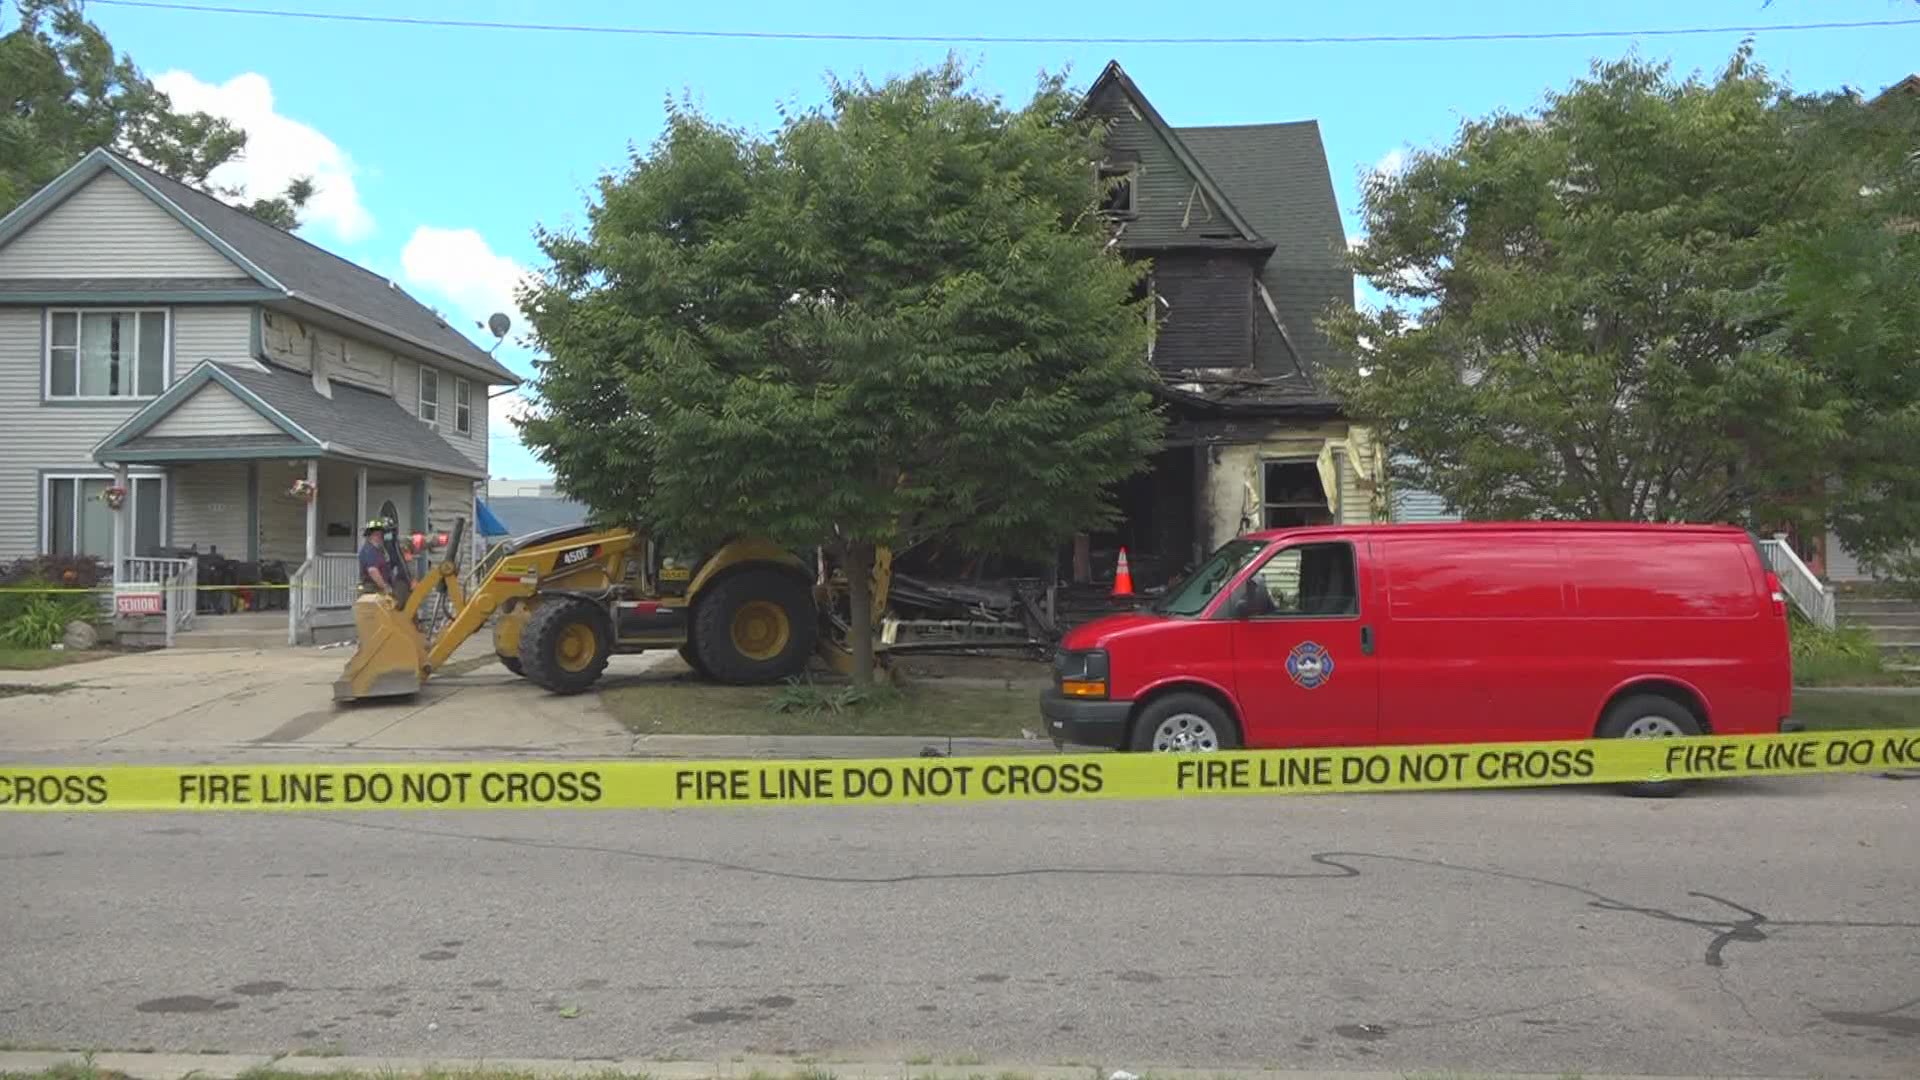 A woman and a child died in a fire early Saturday on the southeast side of Grand Rapids.